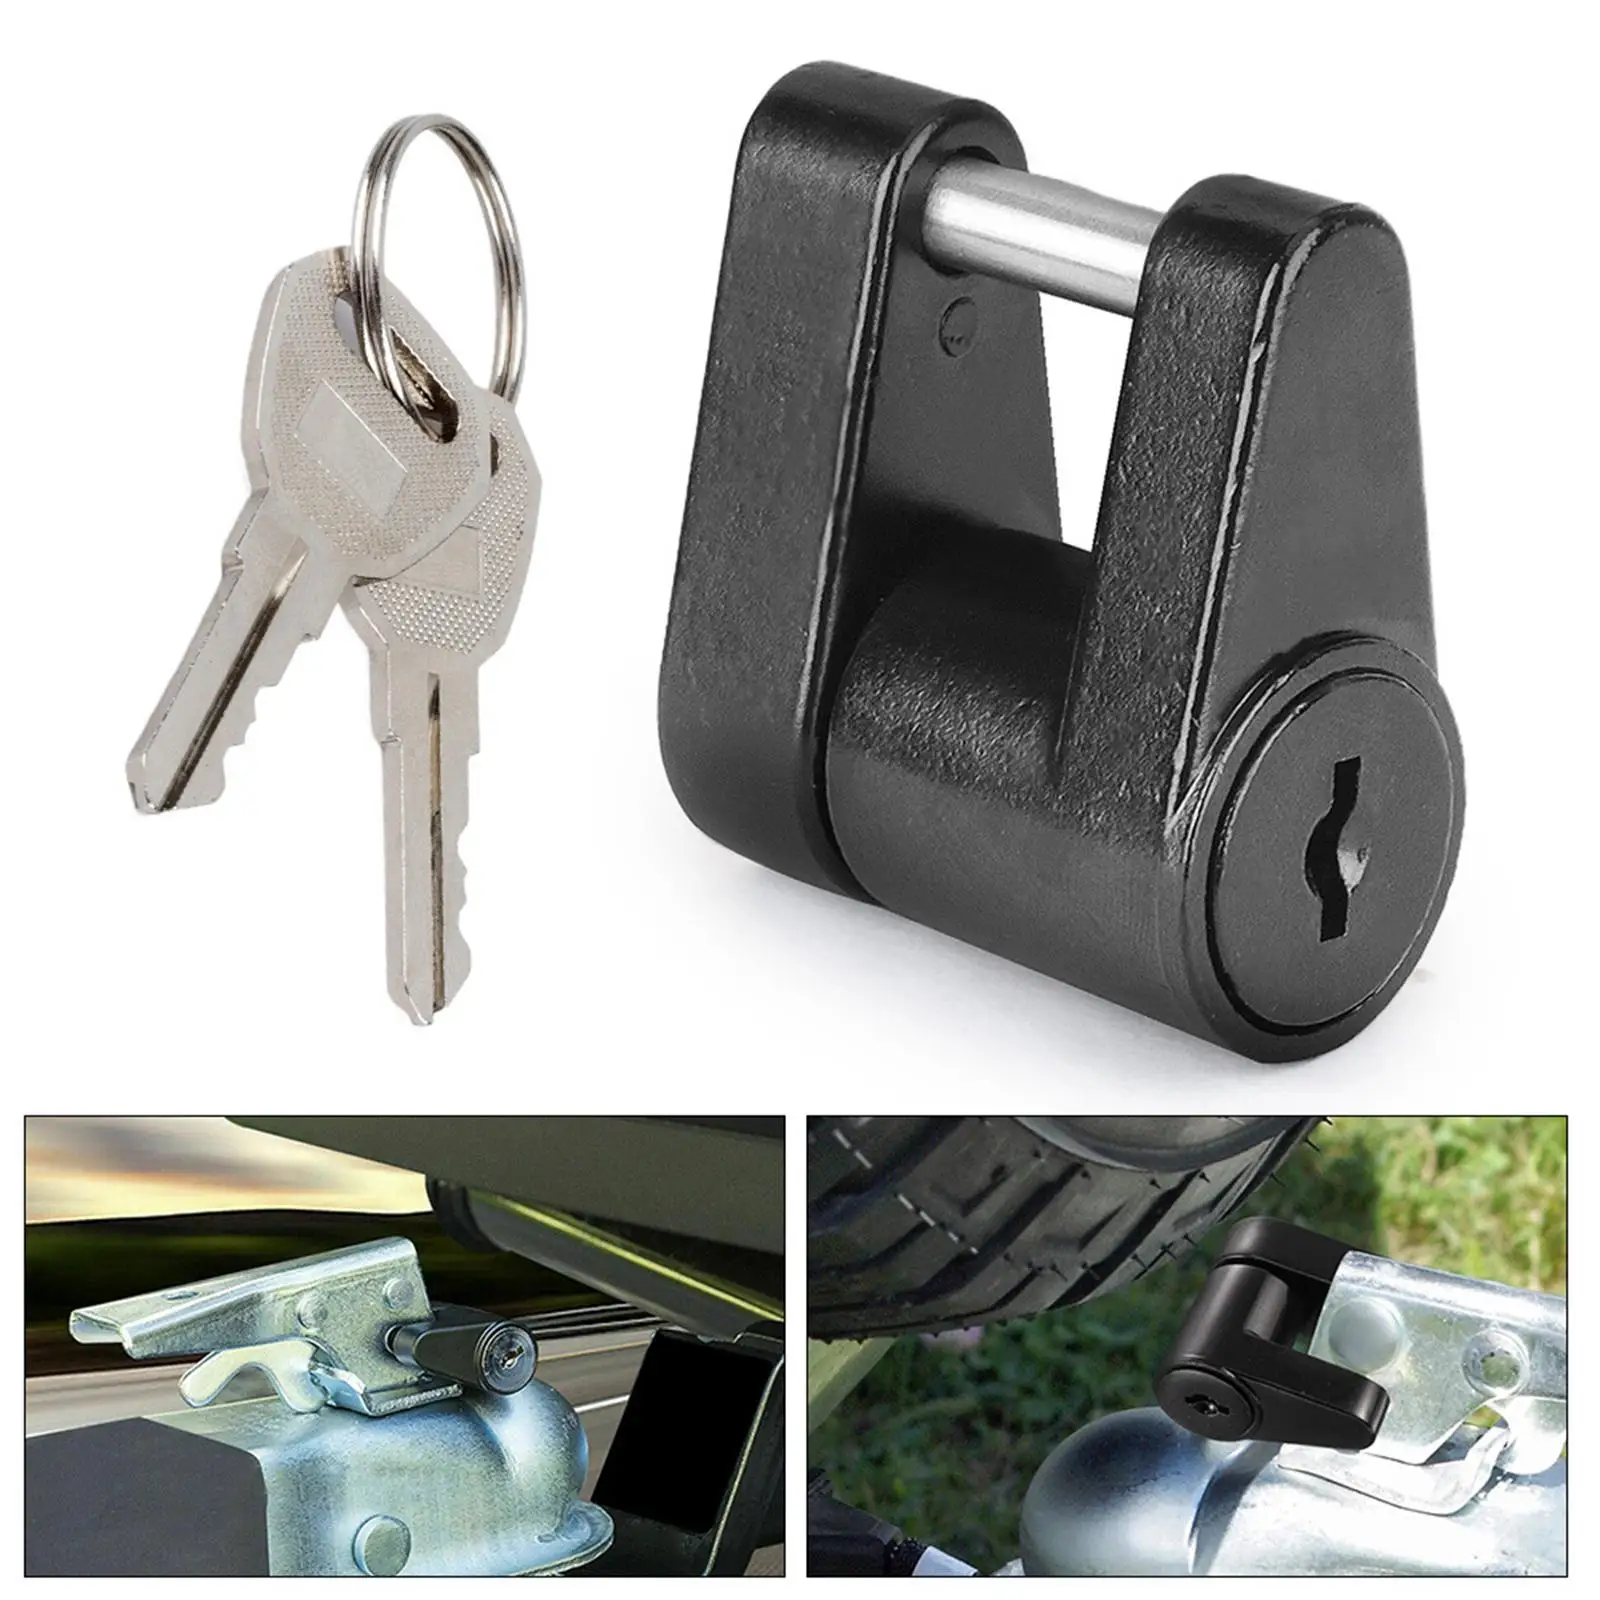 Trailer Hitch Coupler Lock with 2 Keys for Tow Boat Car Coupling Lock